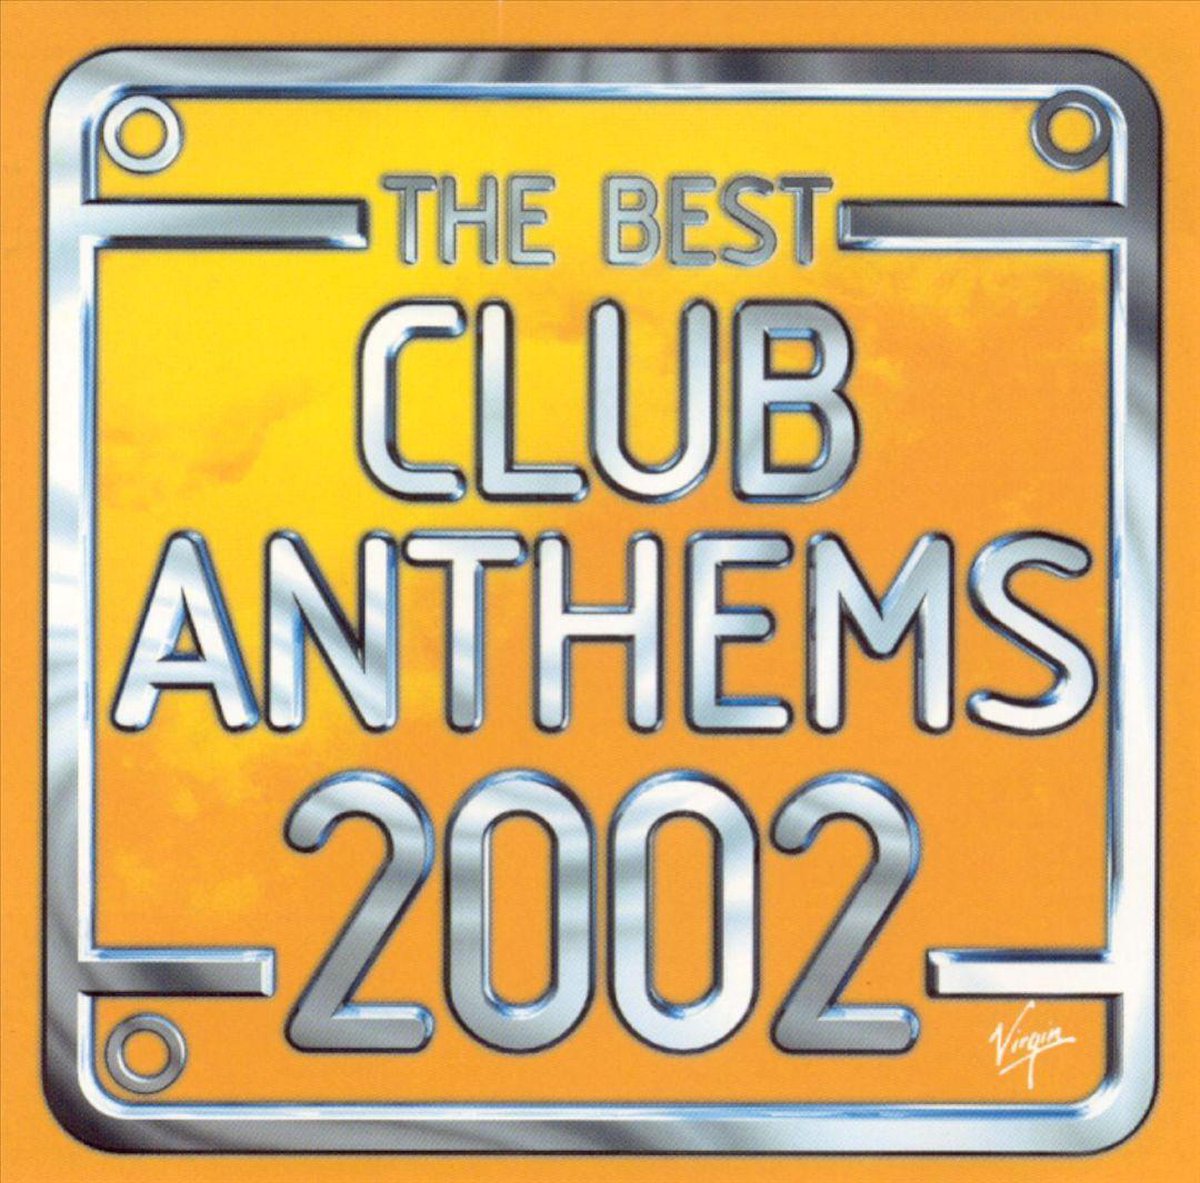 The Best Club Anthems 2002 - various artists